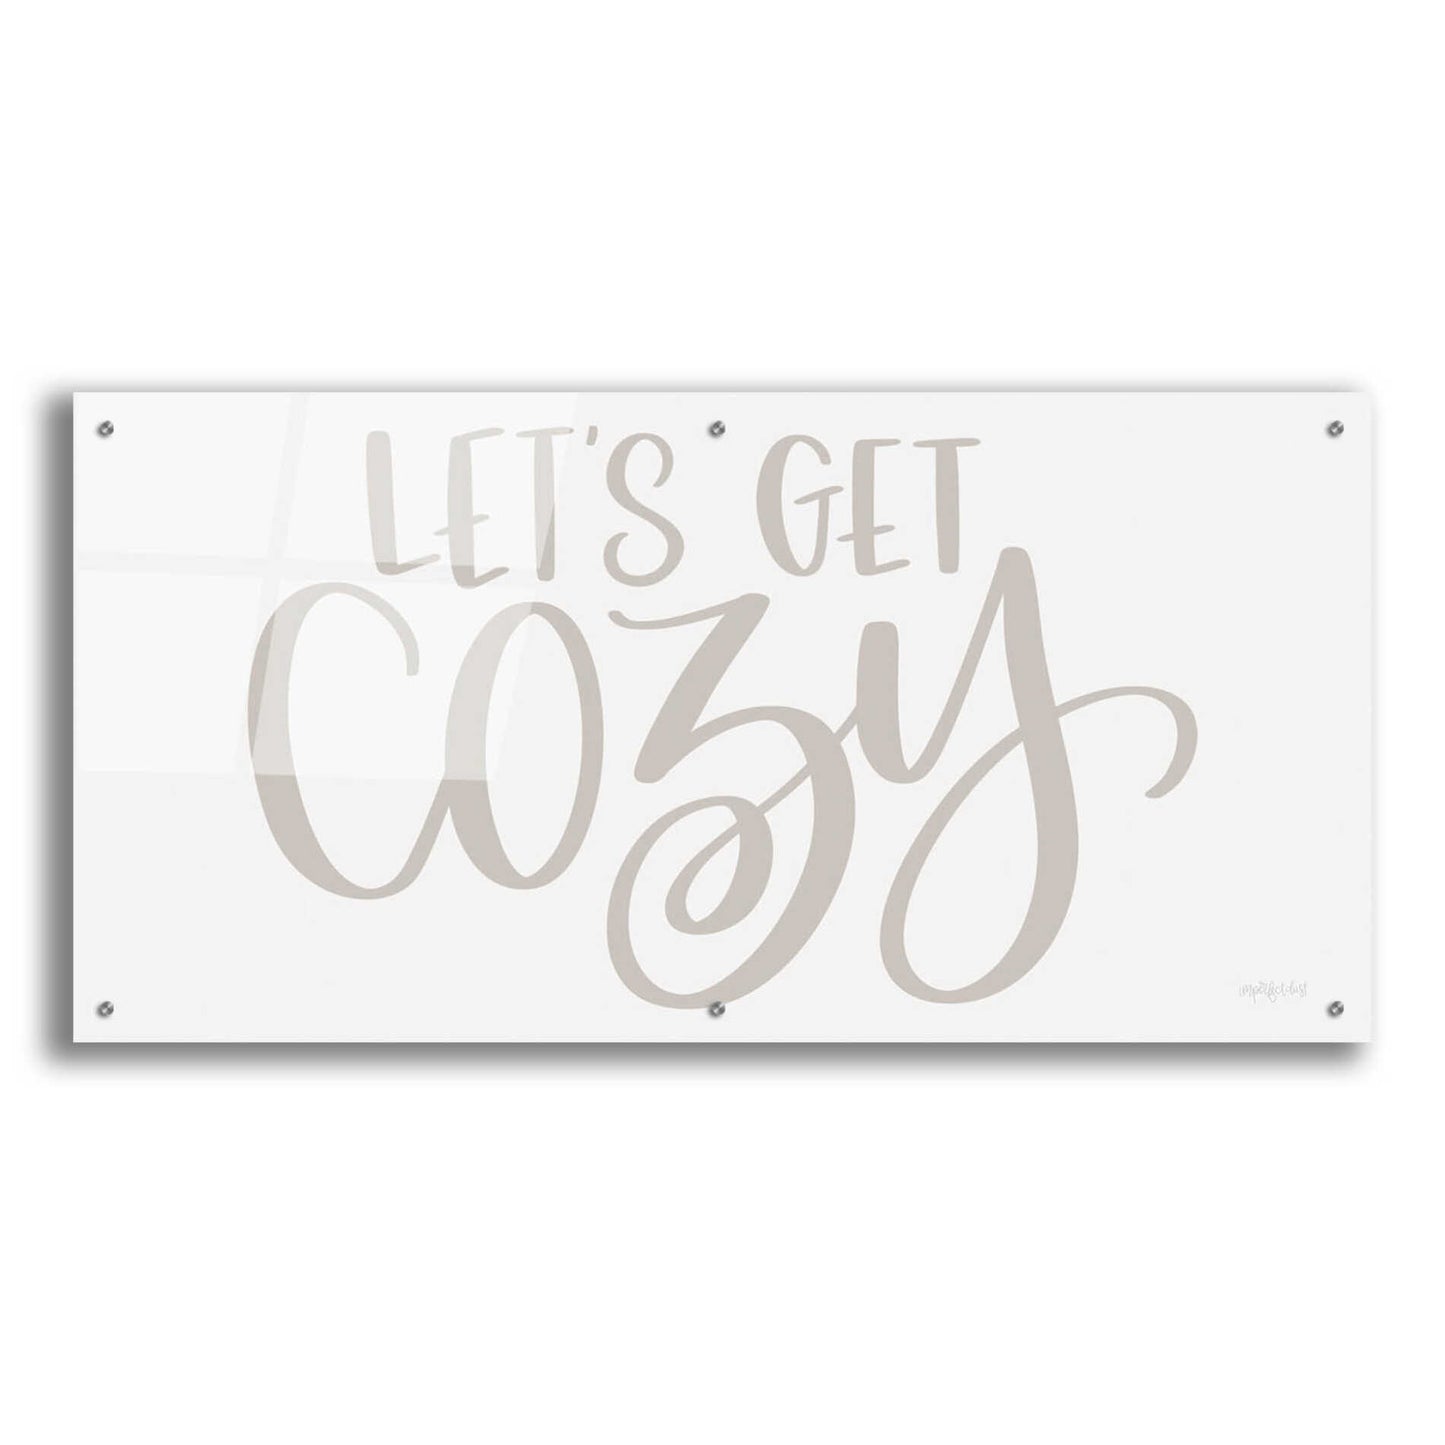 Epic Art 'Let's Get Cozy ' by Imperfect Dust, Acrylic Glass Wall Art,48x24